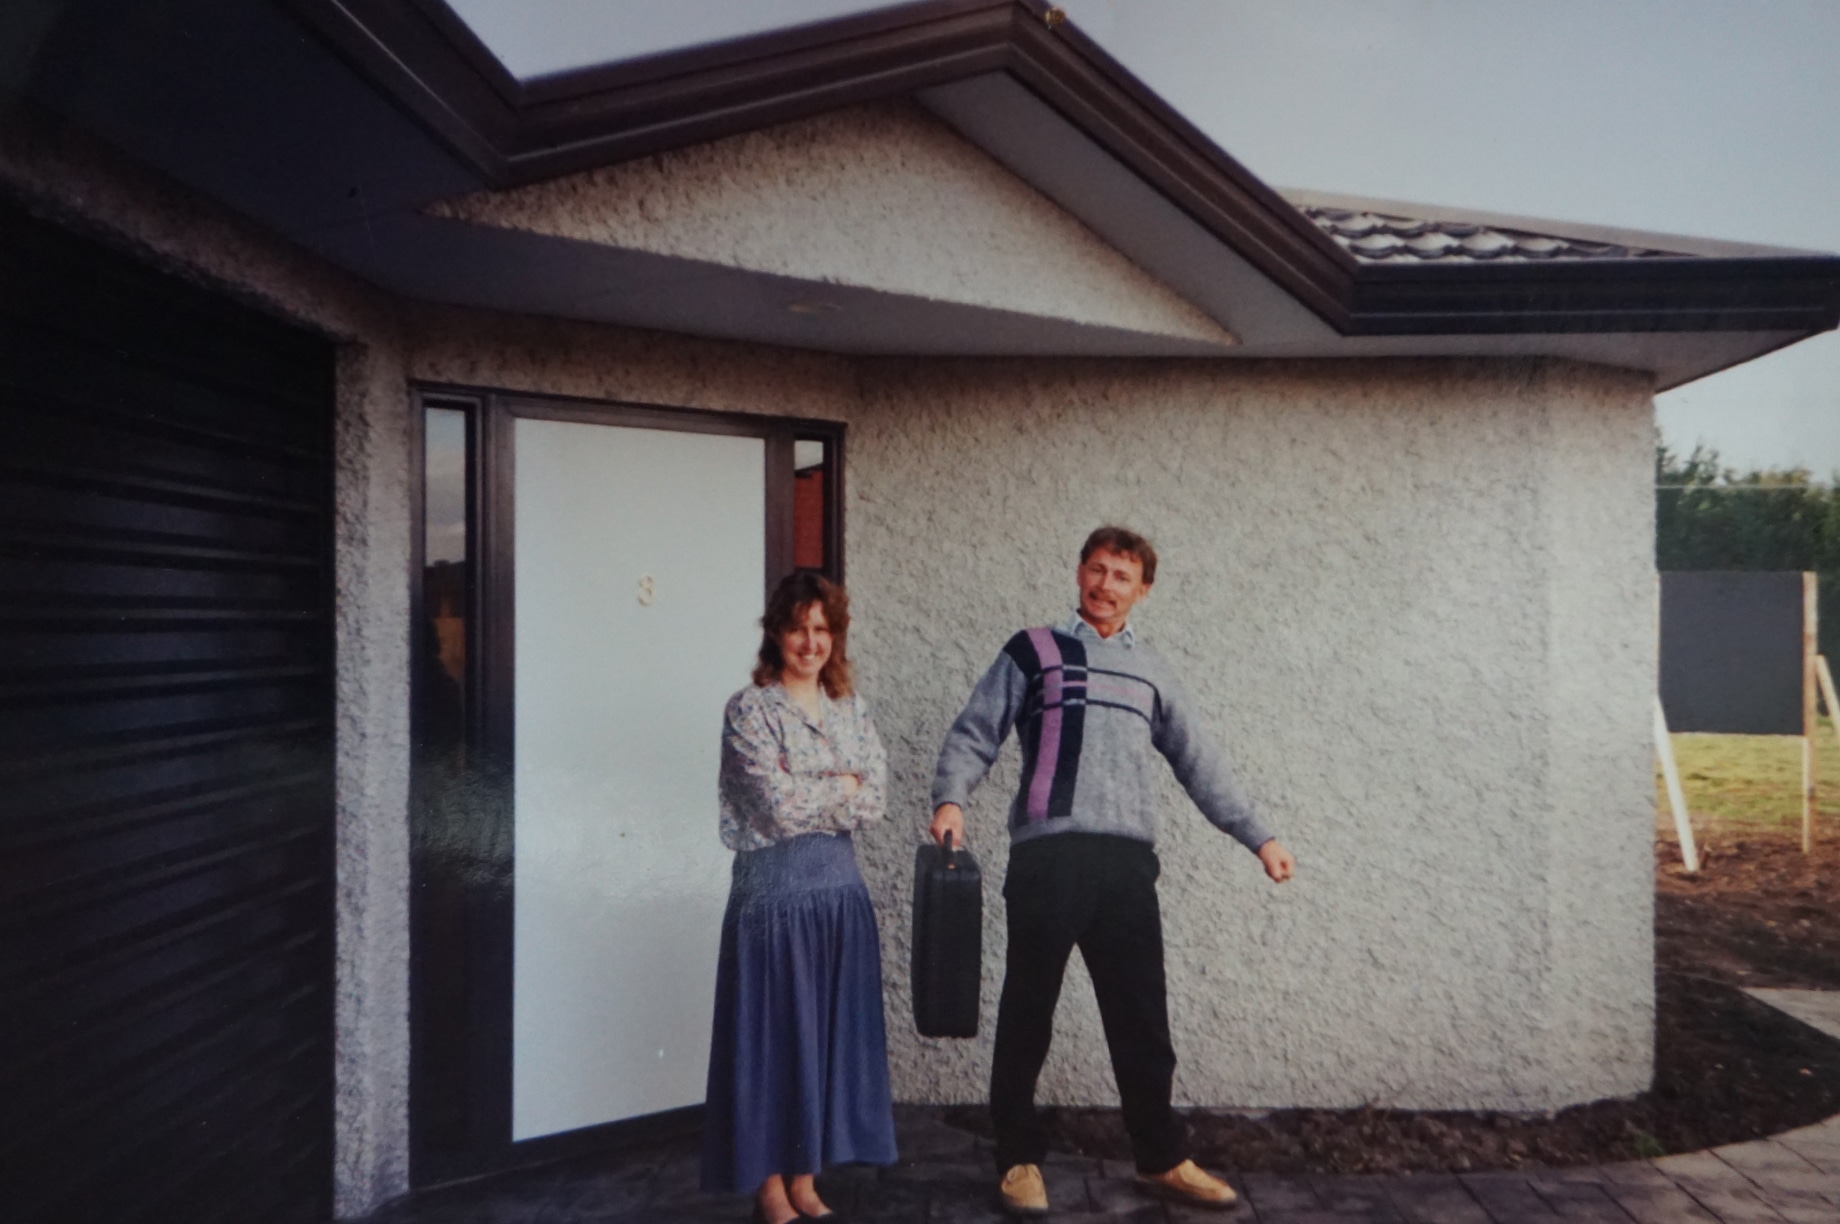 1995 Image of a couple outside their home